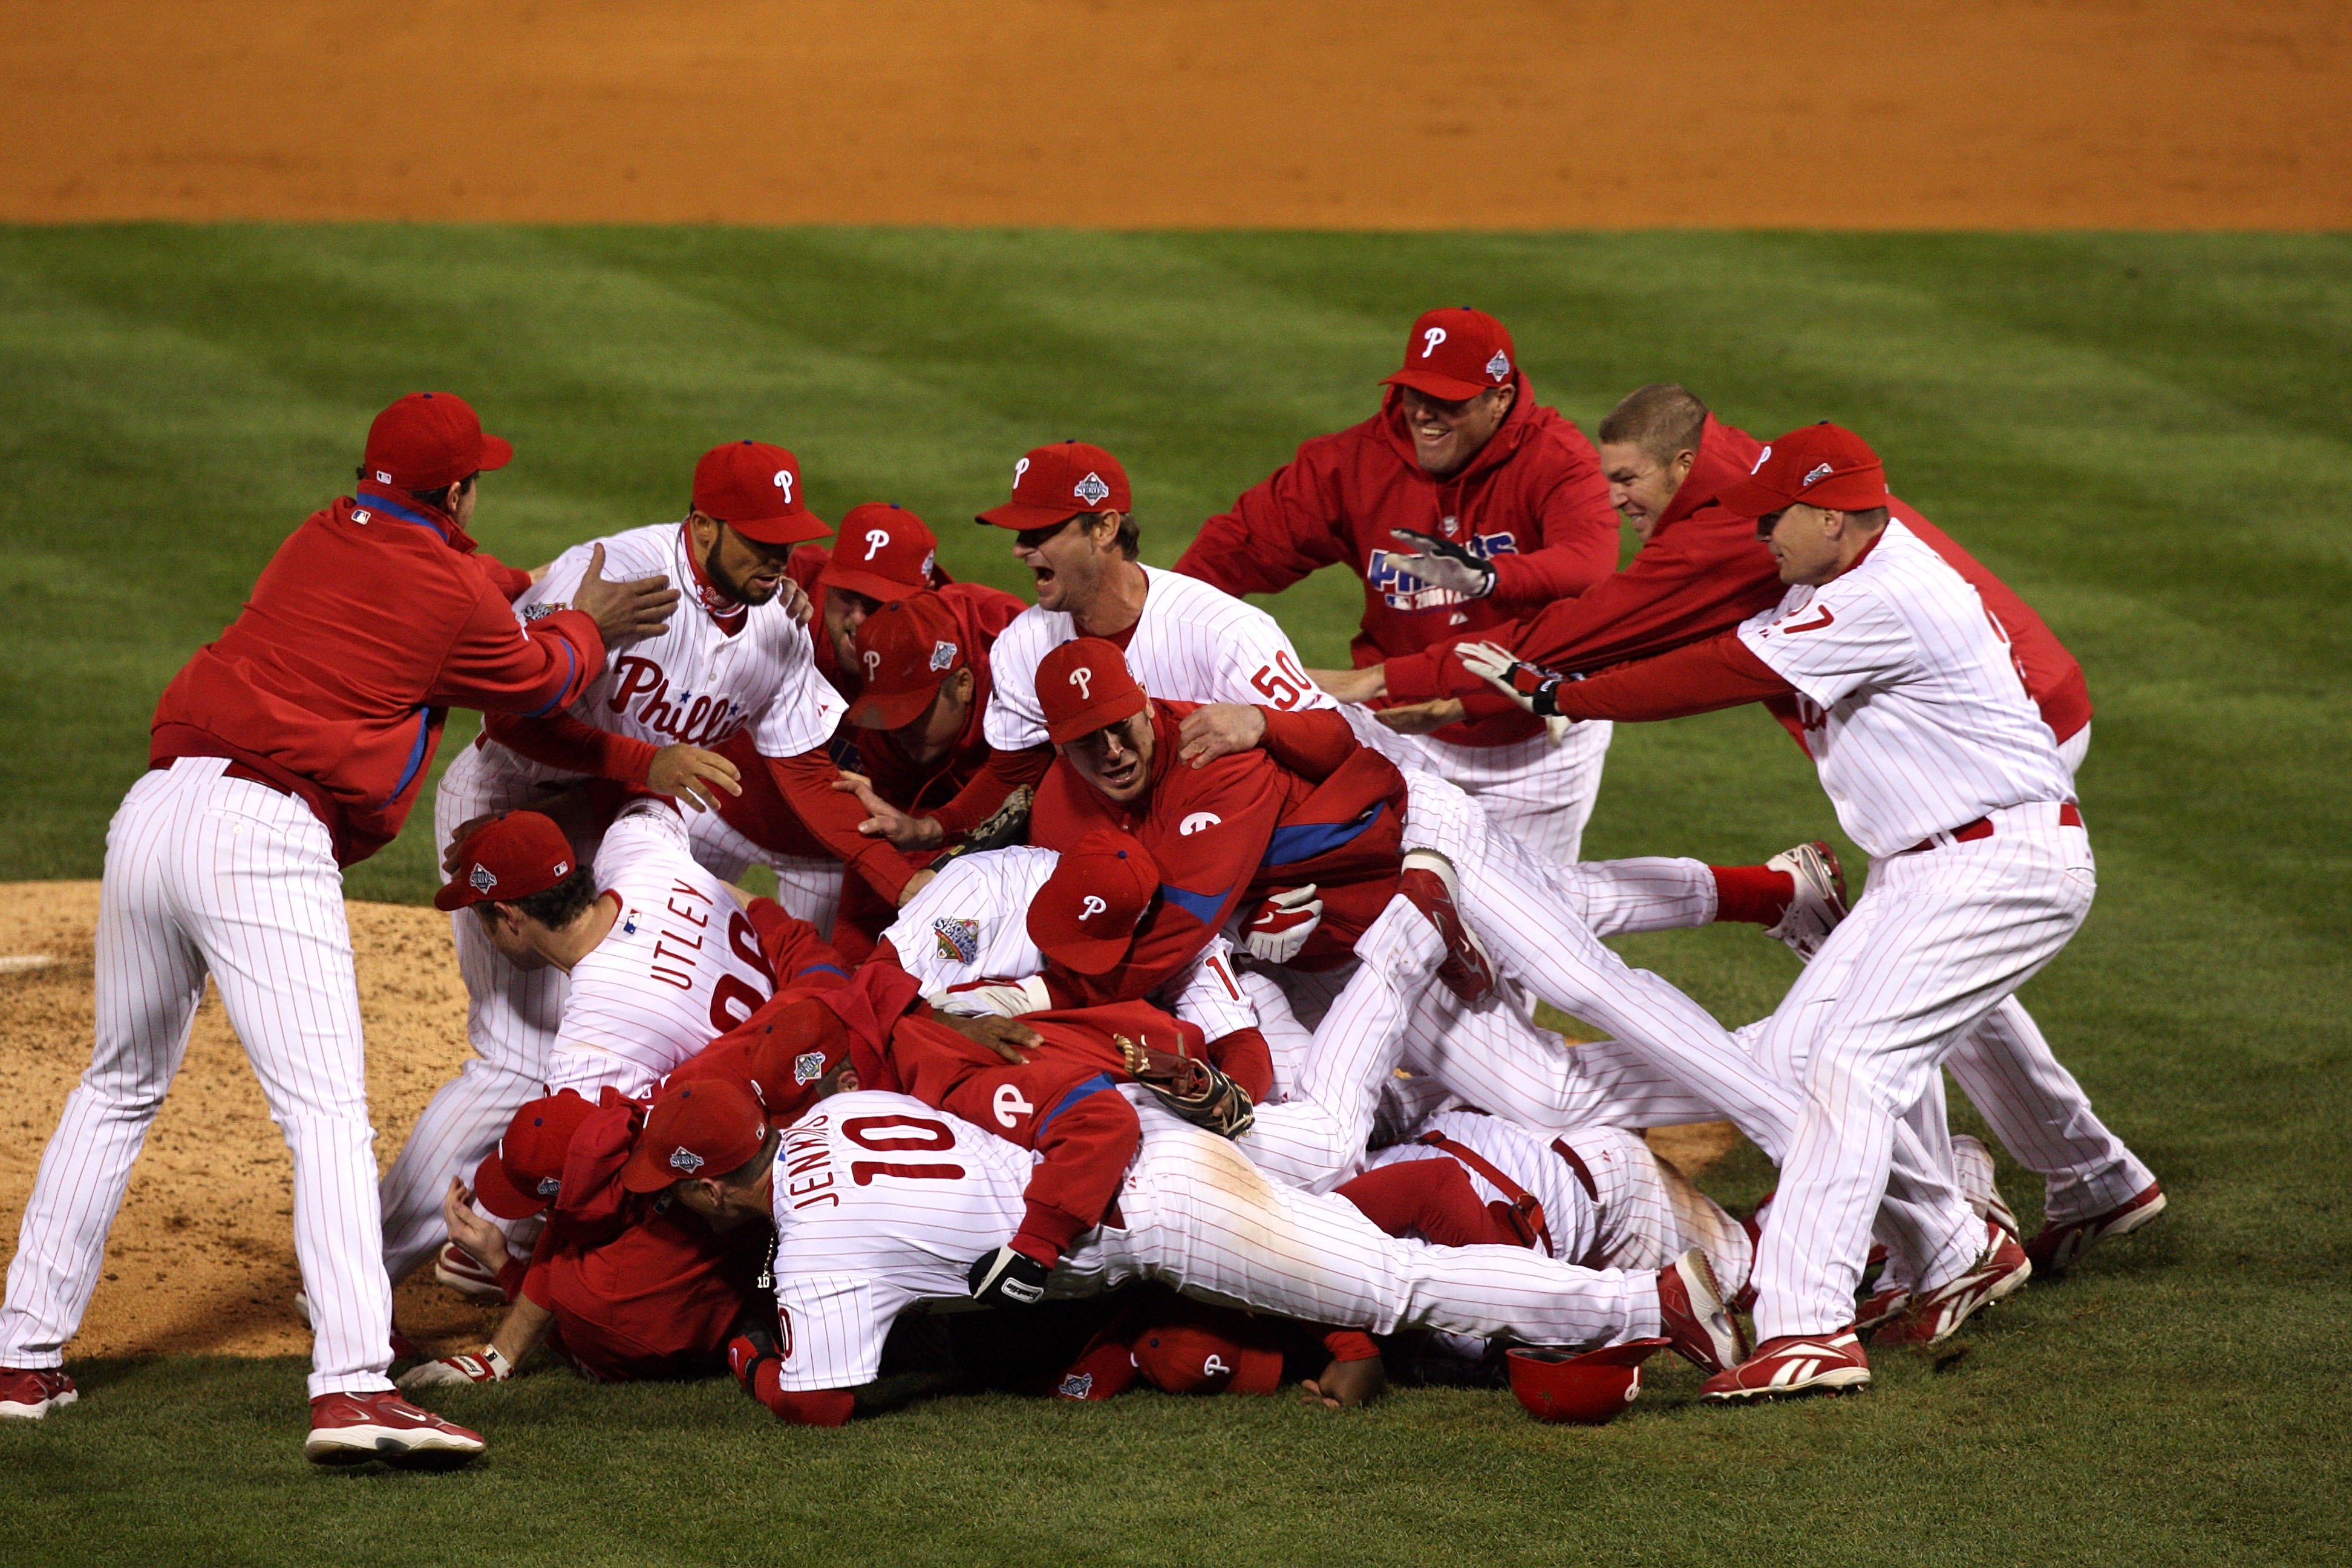 PHILADELPHIA - OCTOBER 29:  The Philadelphia Phillies celebrate their 4-3 win against the Tampa Bay Rays during the continuation of game five of the 2008 MLB World Series on October 29, 2008 at Citizens Bank Park in Philadelphia, Pennsylvania.  (Photo by